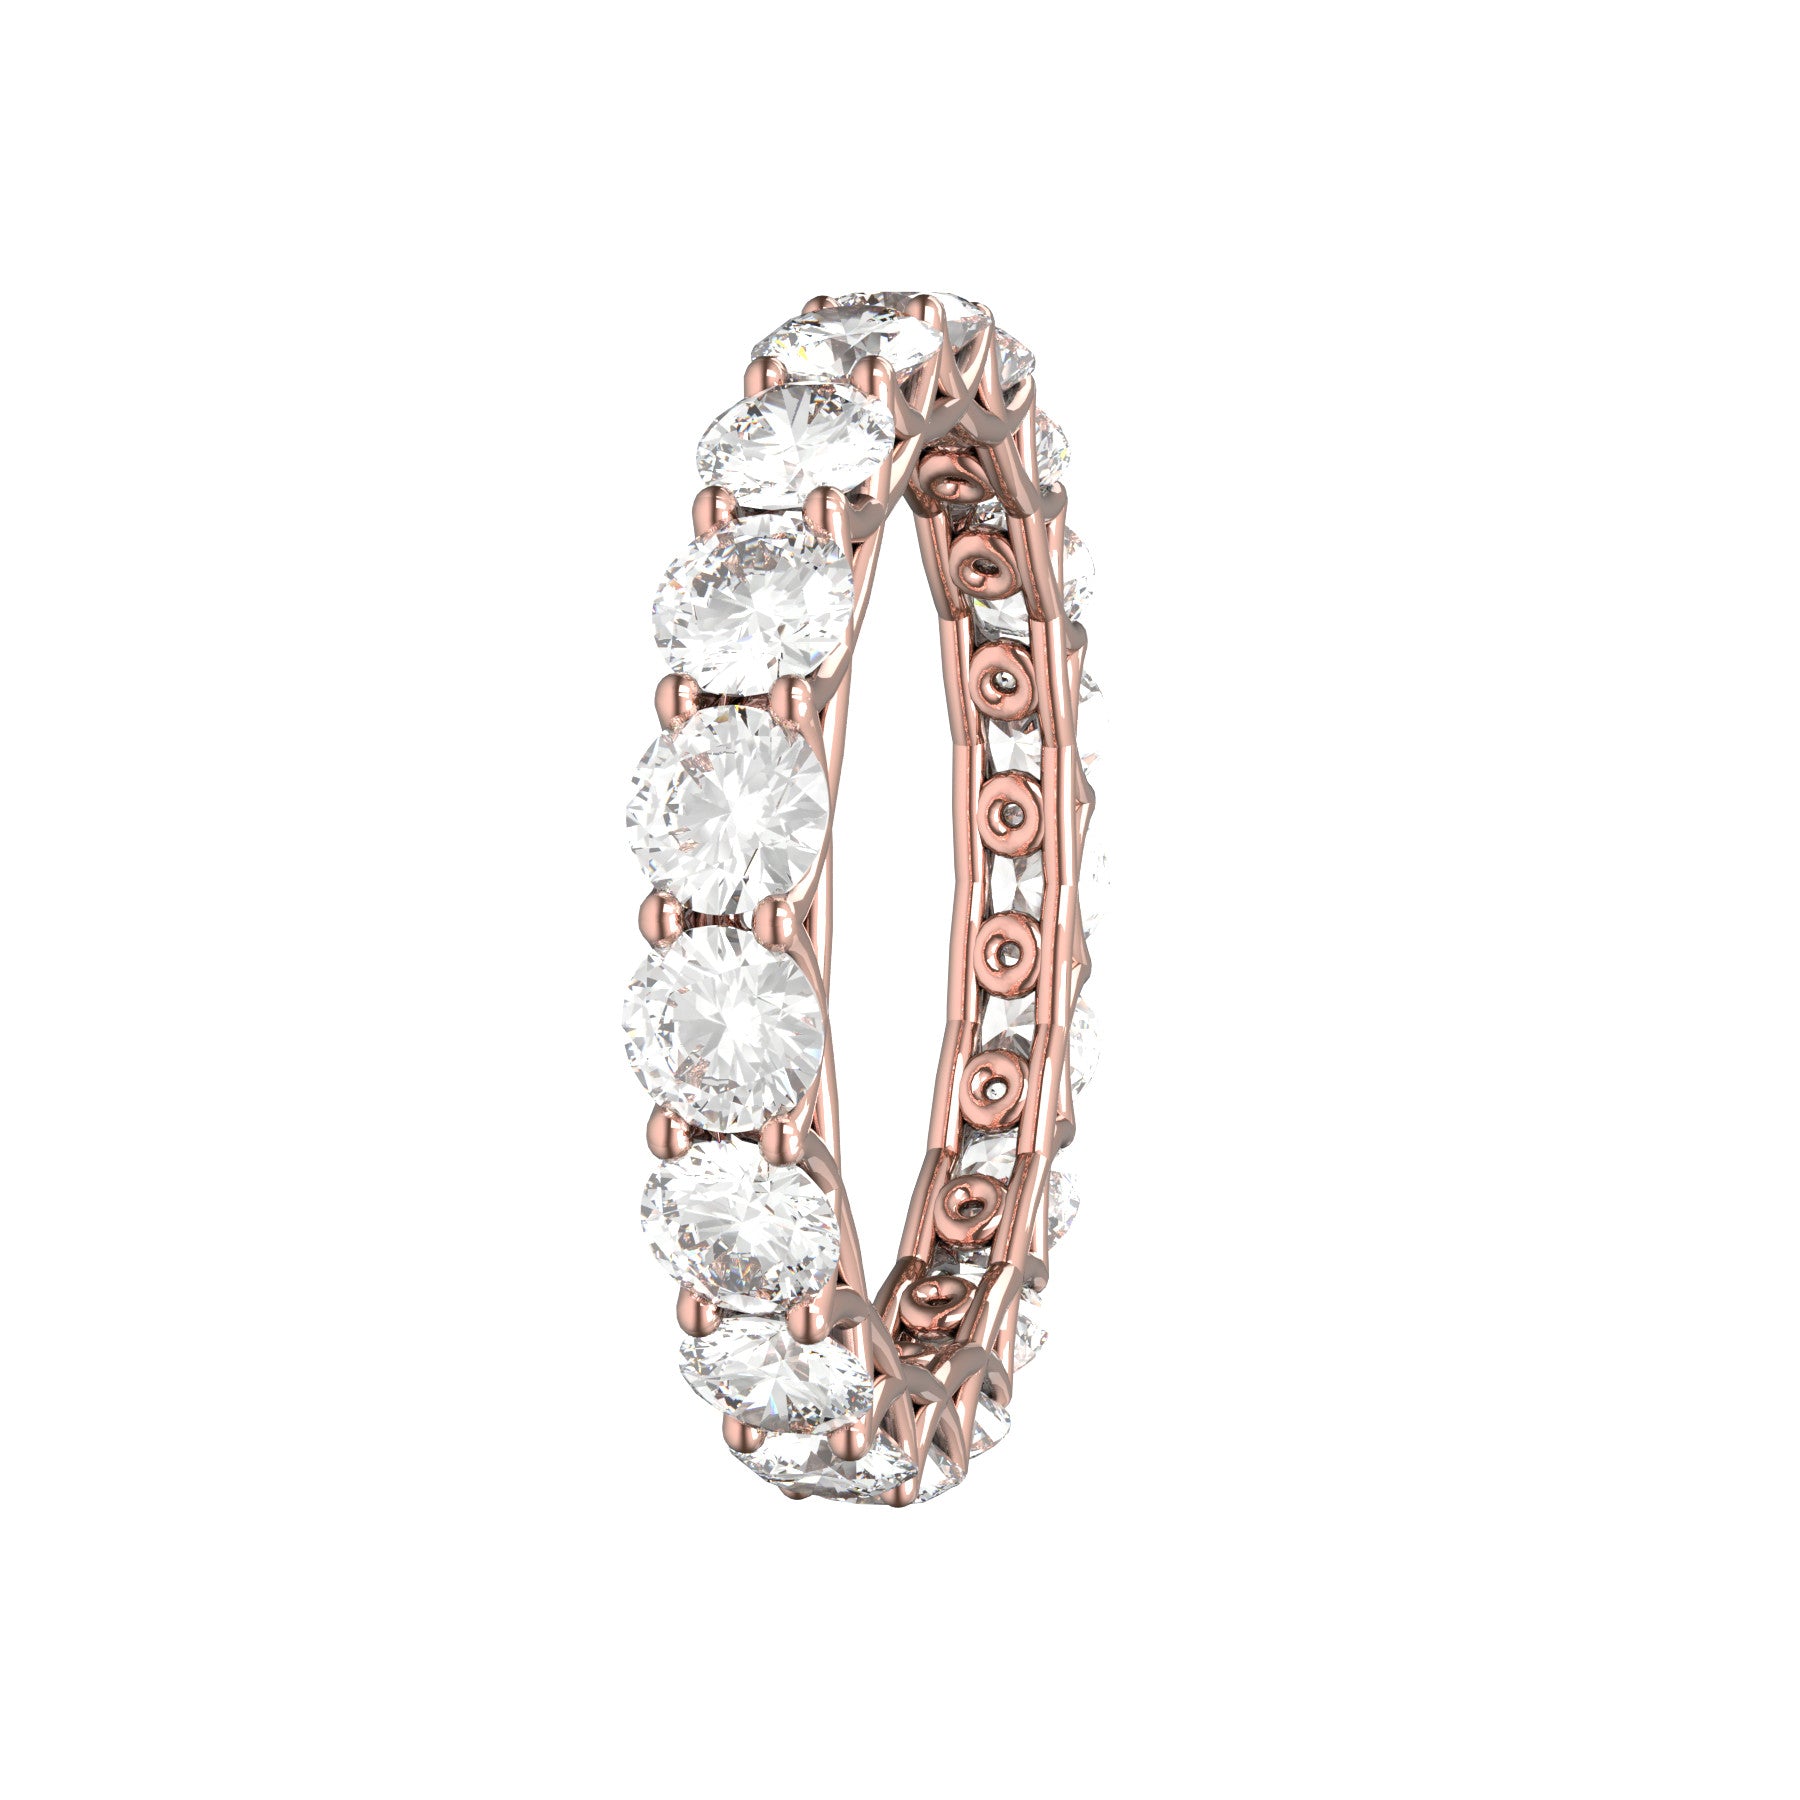 sweet hearts wedding band, 18 K pink gold, 0,13 natural diamonds, weight about 1,90 g. (0.07 oz), width 3,25 mm